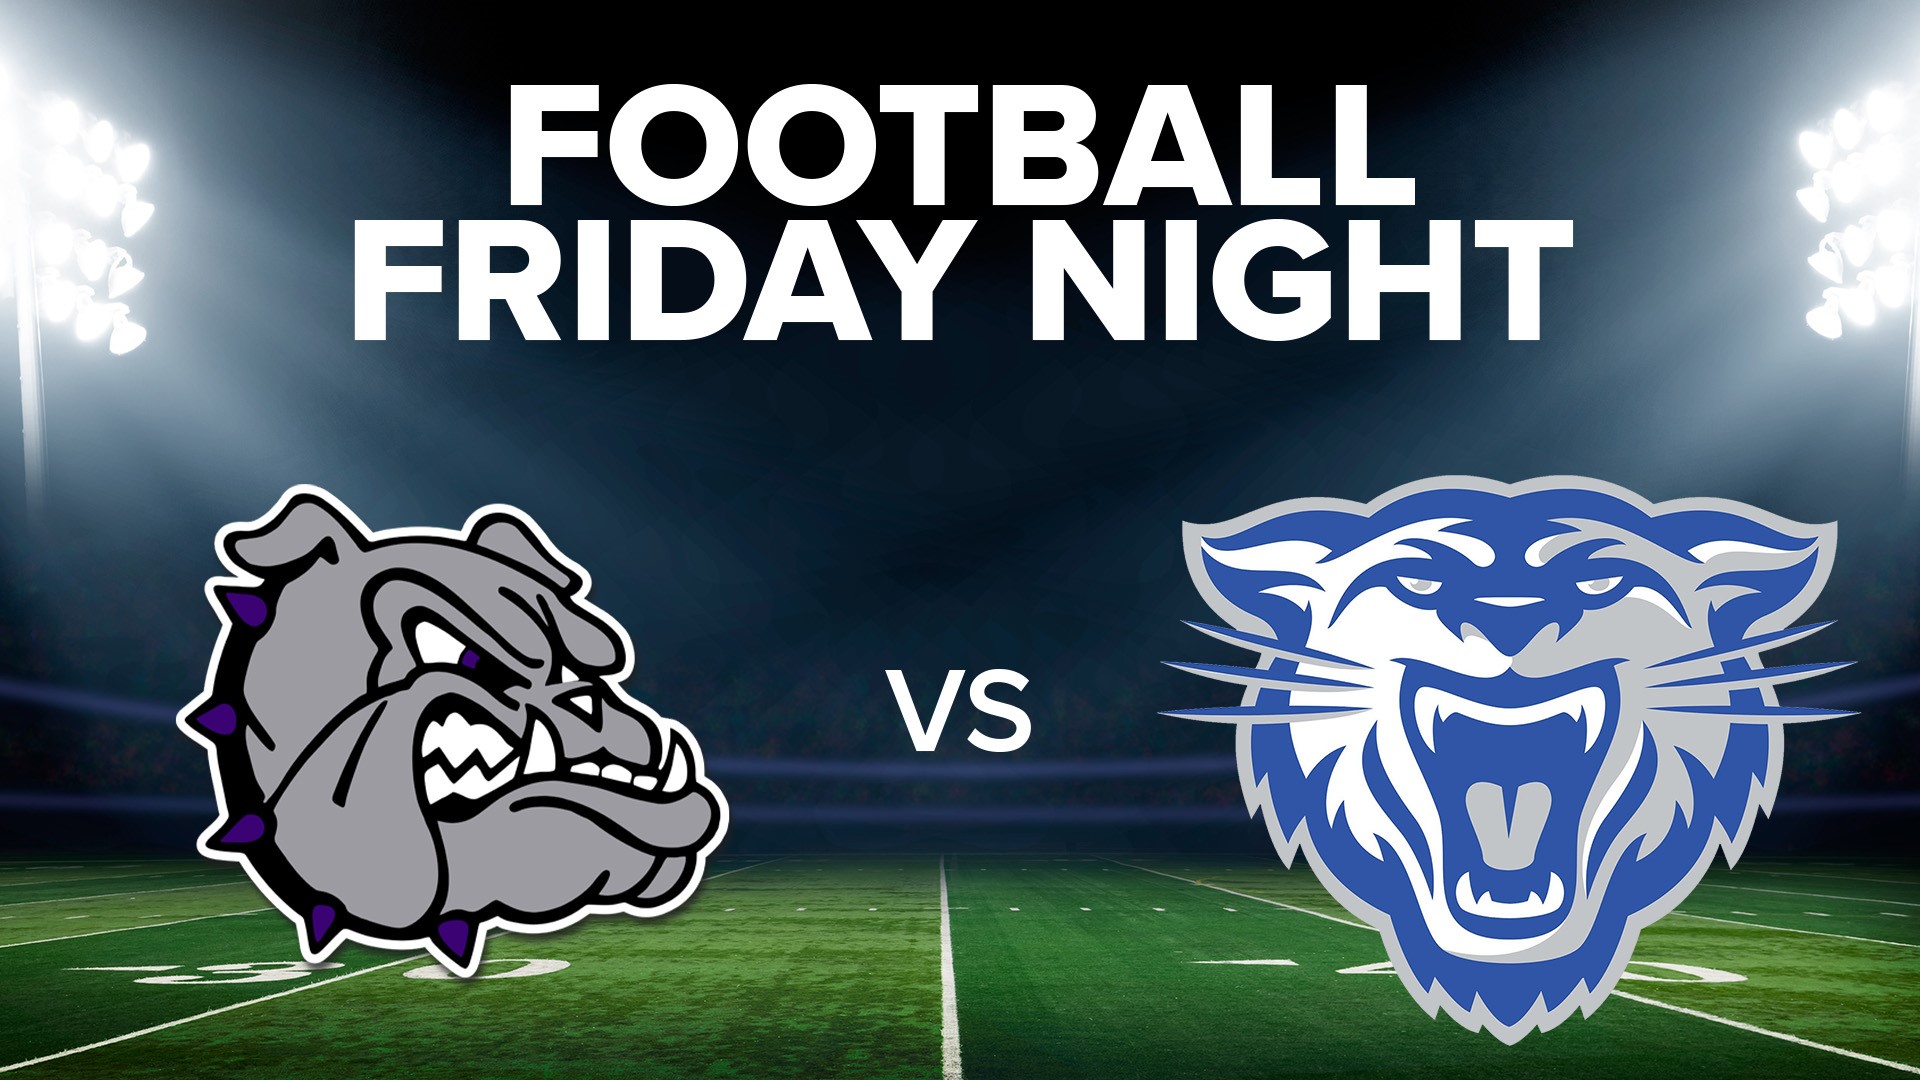 Fayetteville took down Conway in Football Friday Night Week 13.